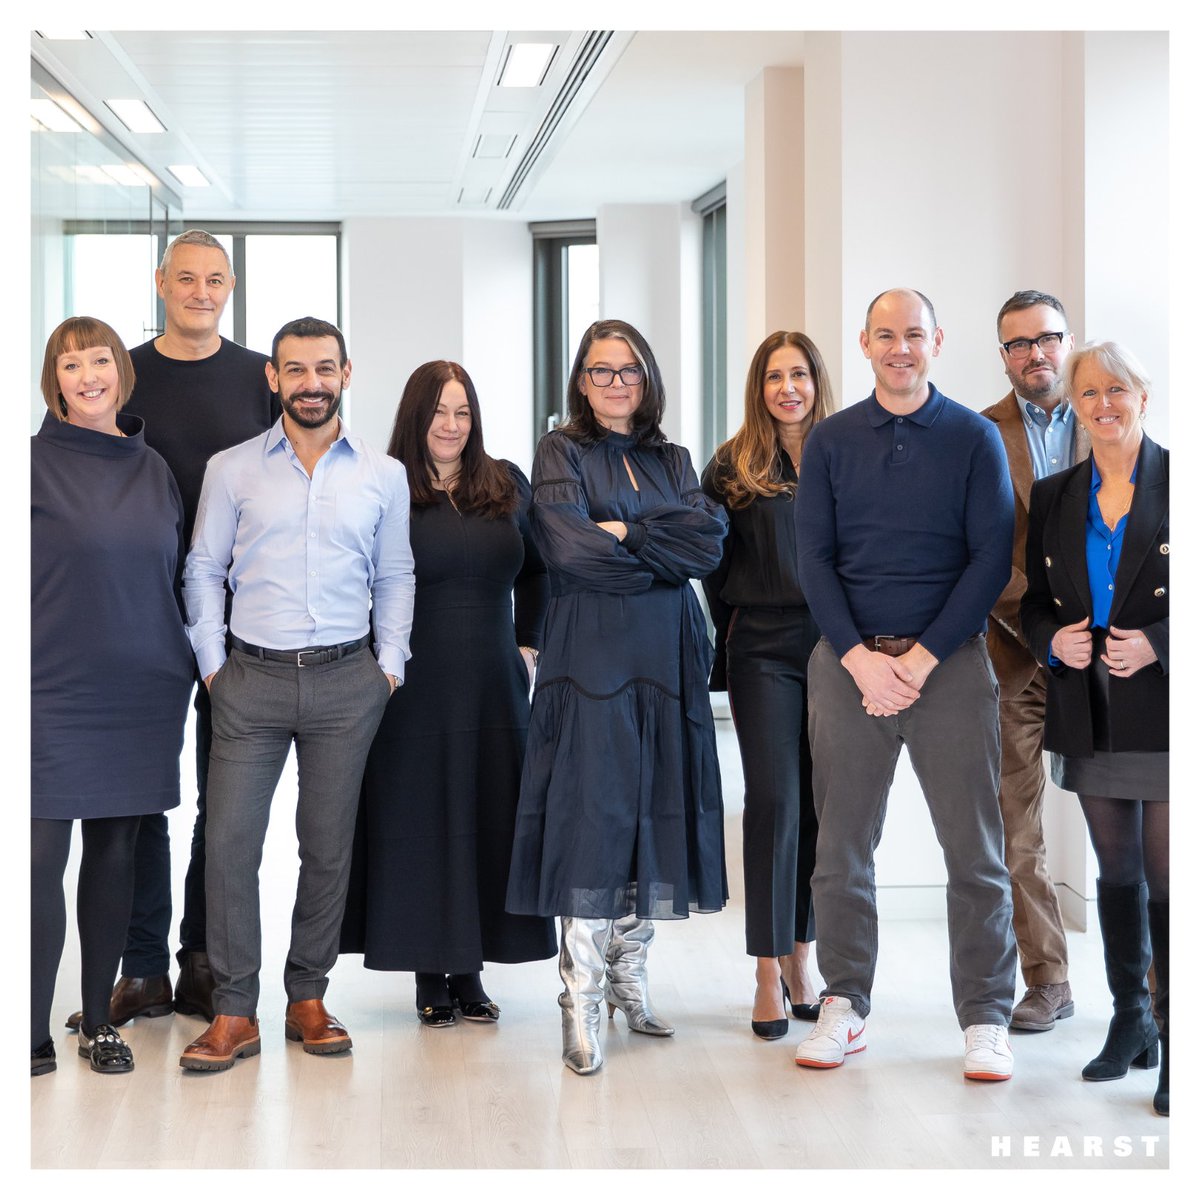 We're excited to announce our new Leadership team, supercharged to use the power of our world-class, trusted brands to deepen our relationships with our valued customers and clients. Read more on @CampaignMag: bit.ly/3T2T6f3